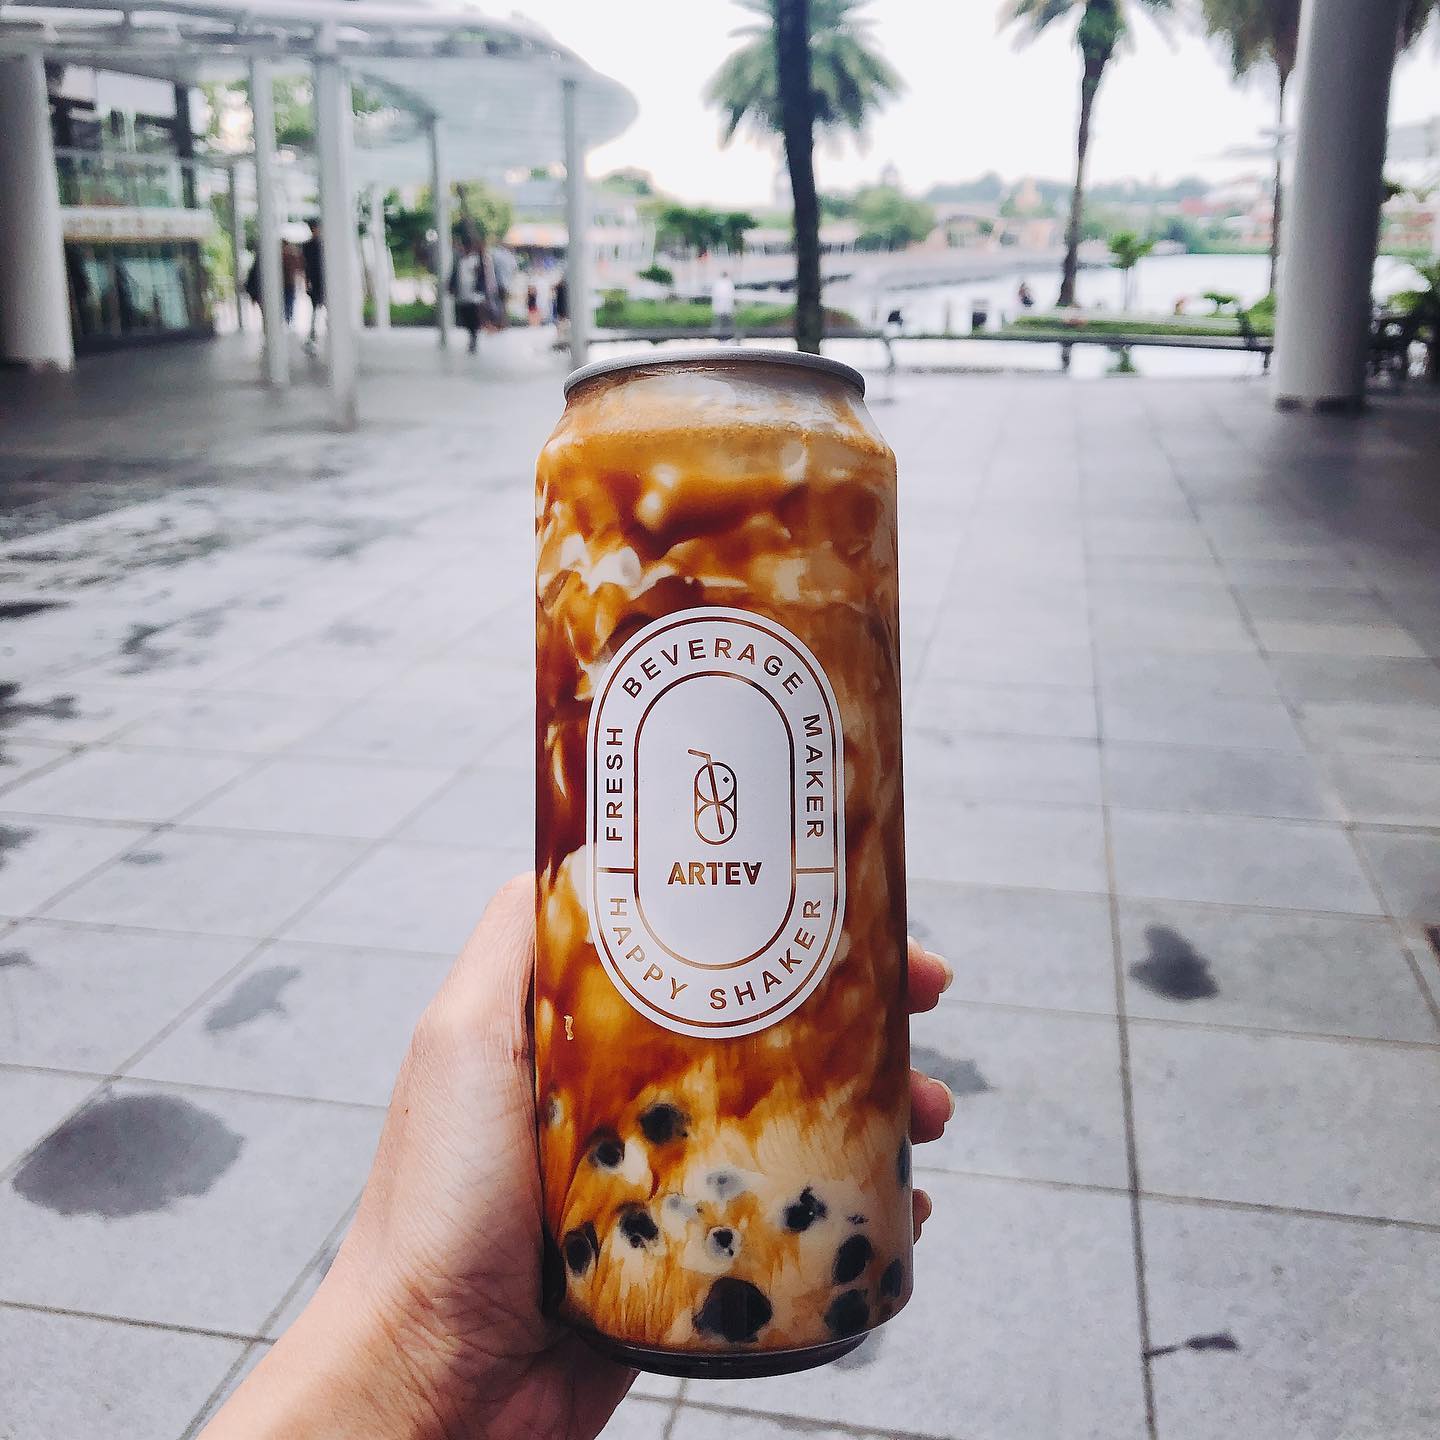 This cafe in Singapore sells Brown Sugar Bubble Milk in a can for $5.20 - 4